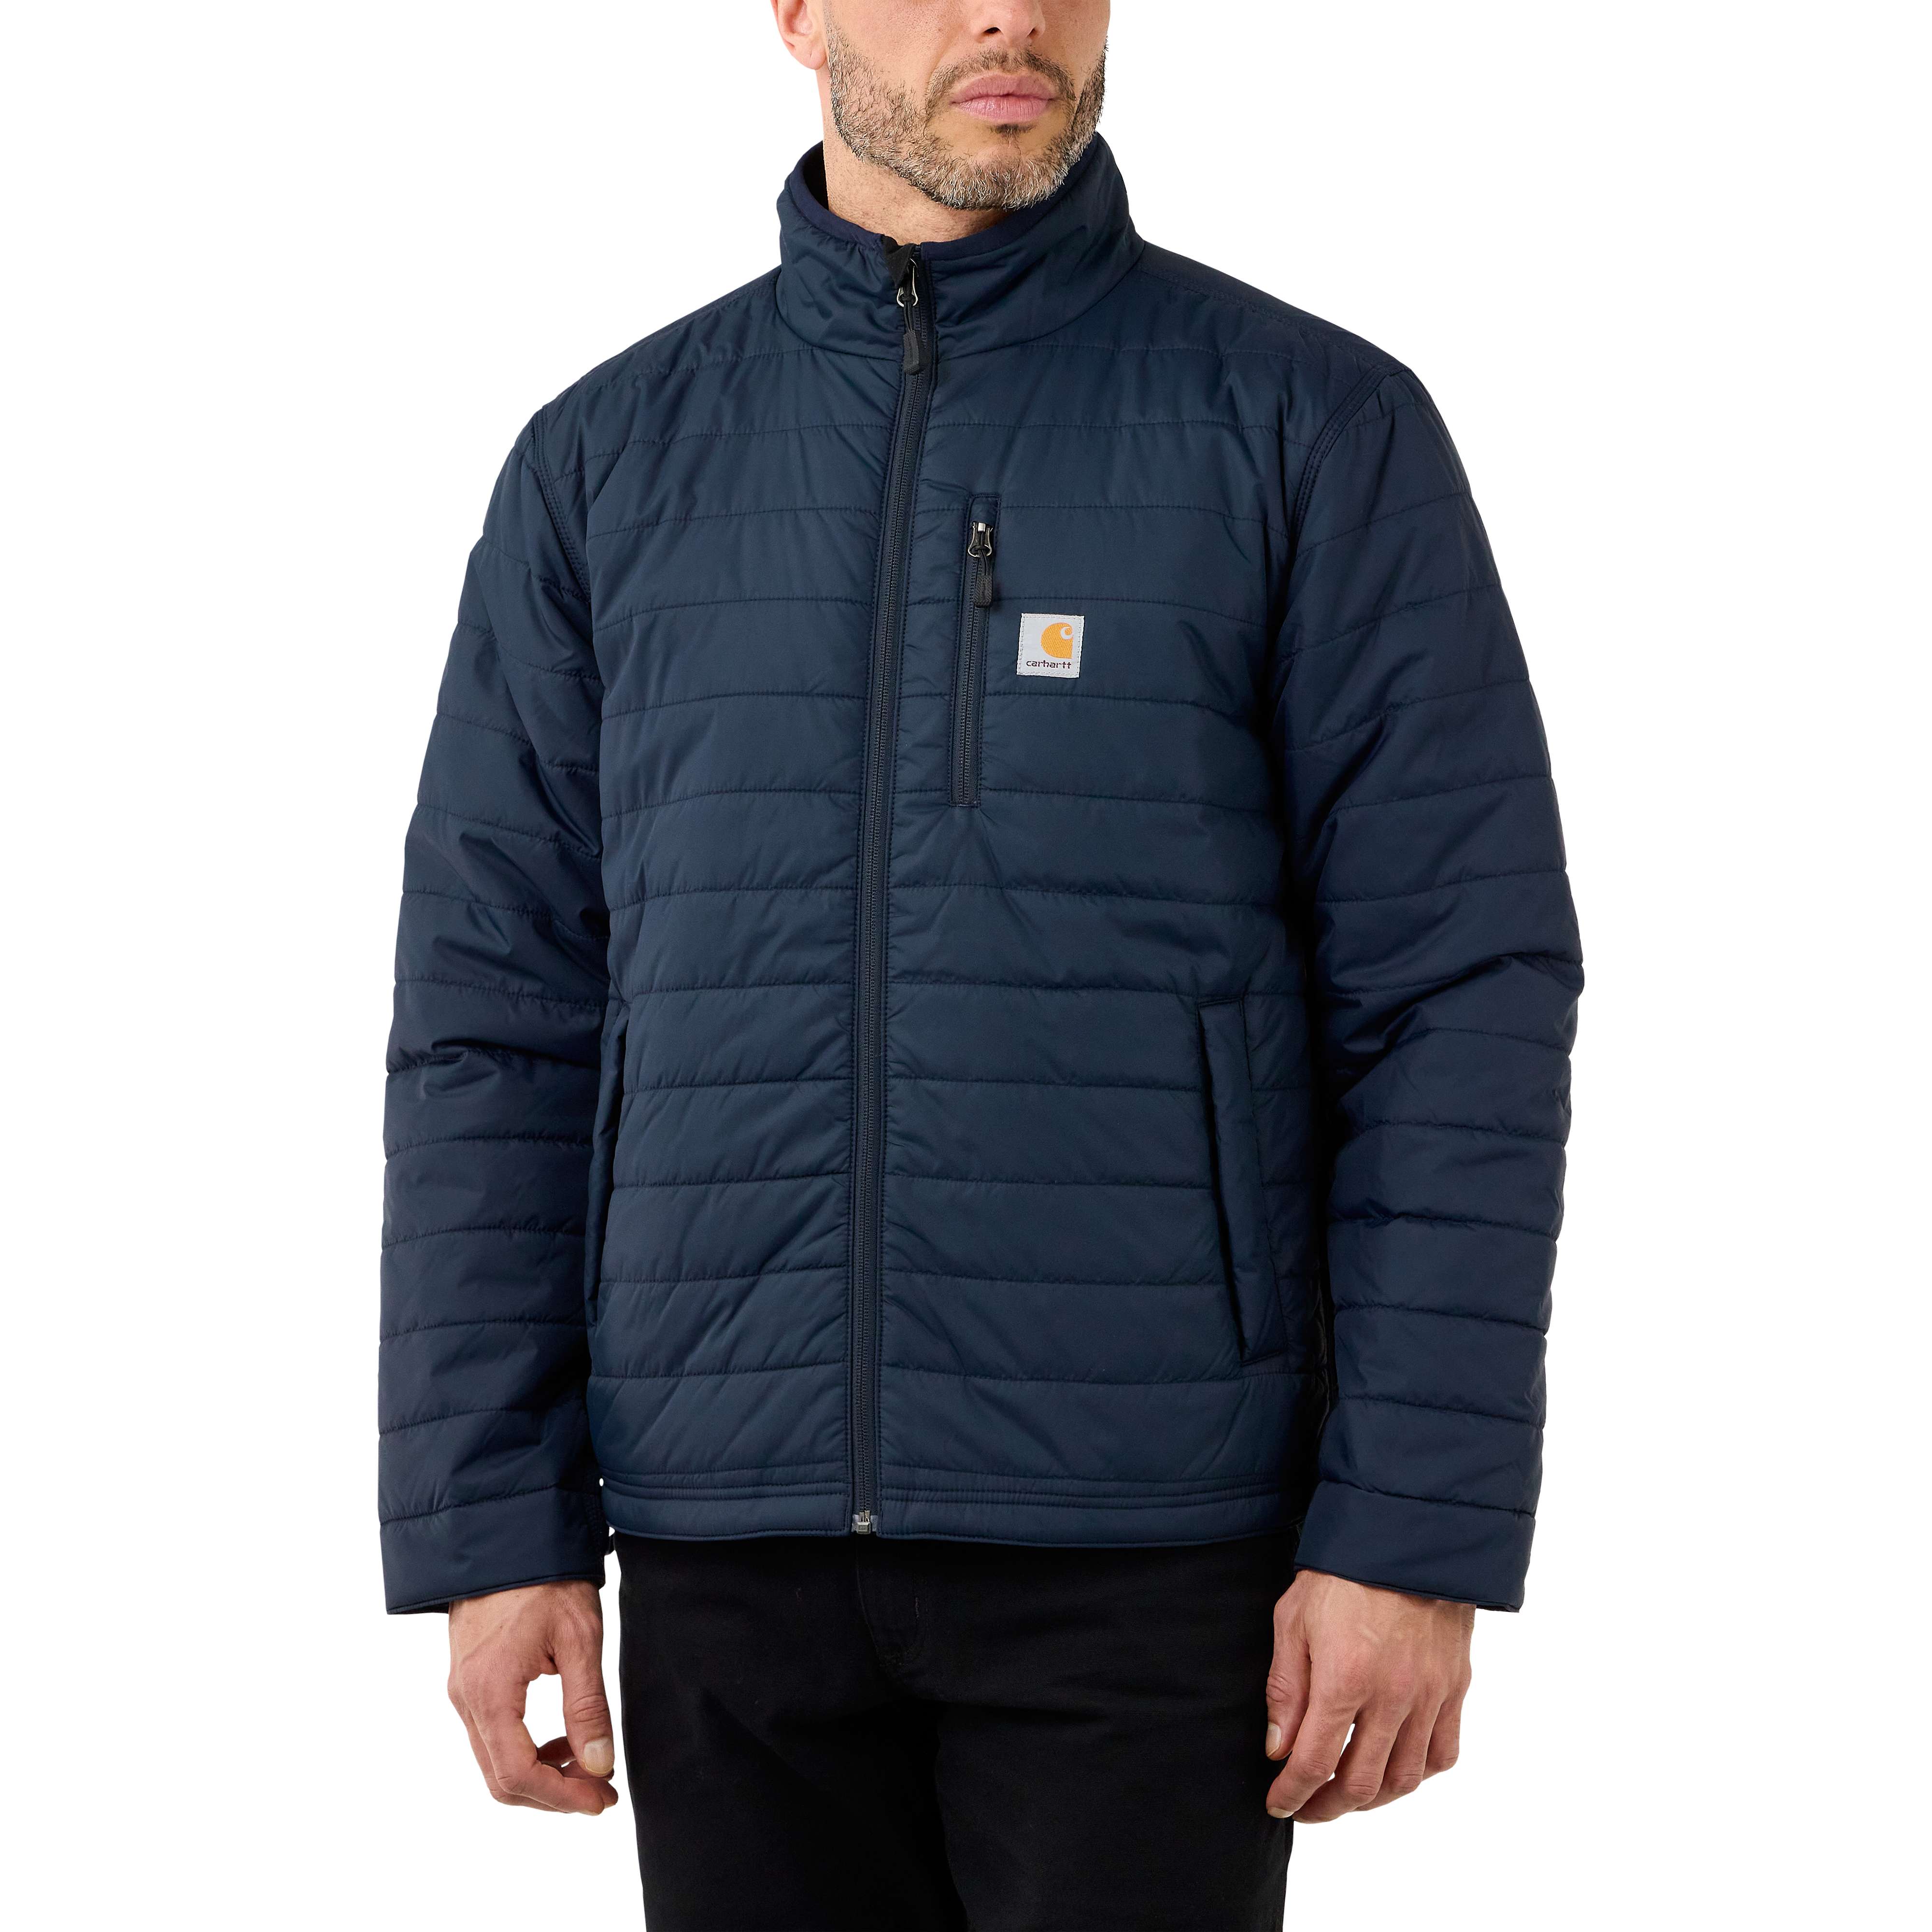 Unlock Wilderness' choice in the Carhartt Vs North Face comparison, the Rain Defender Relaxed Fit Lightweight Insulated Jacket by Carhartt